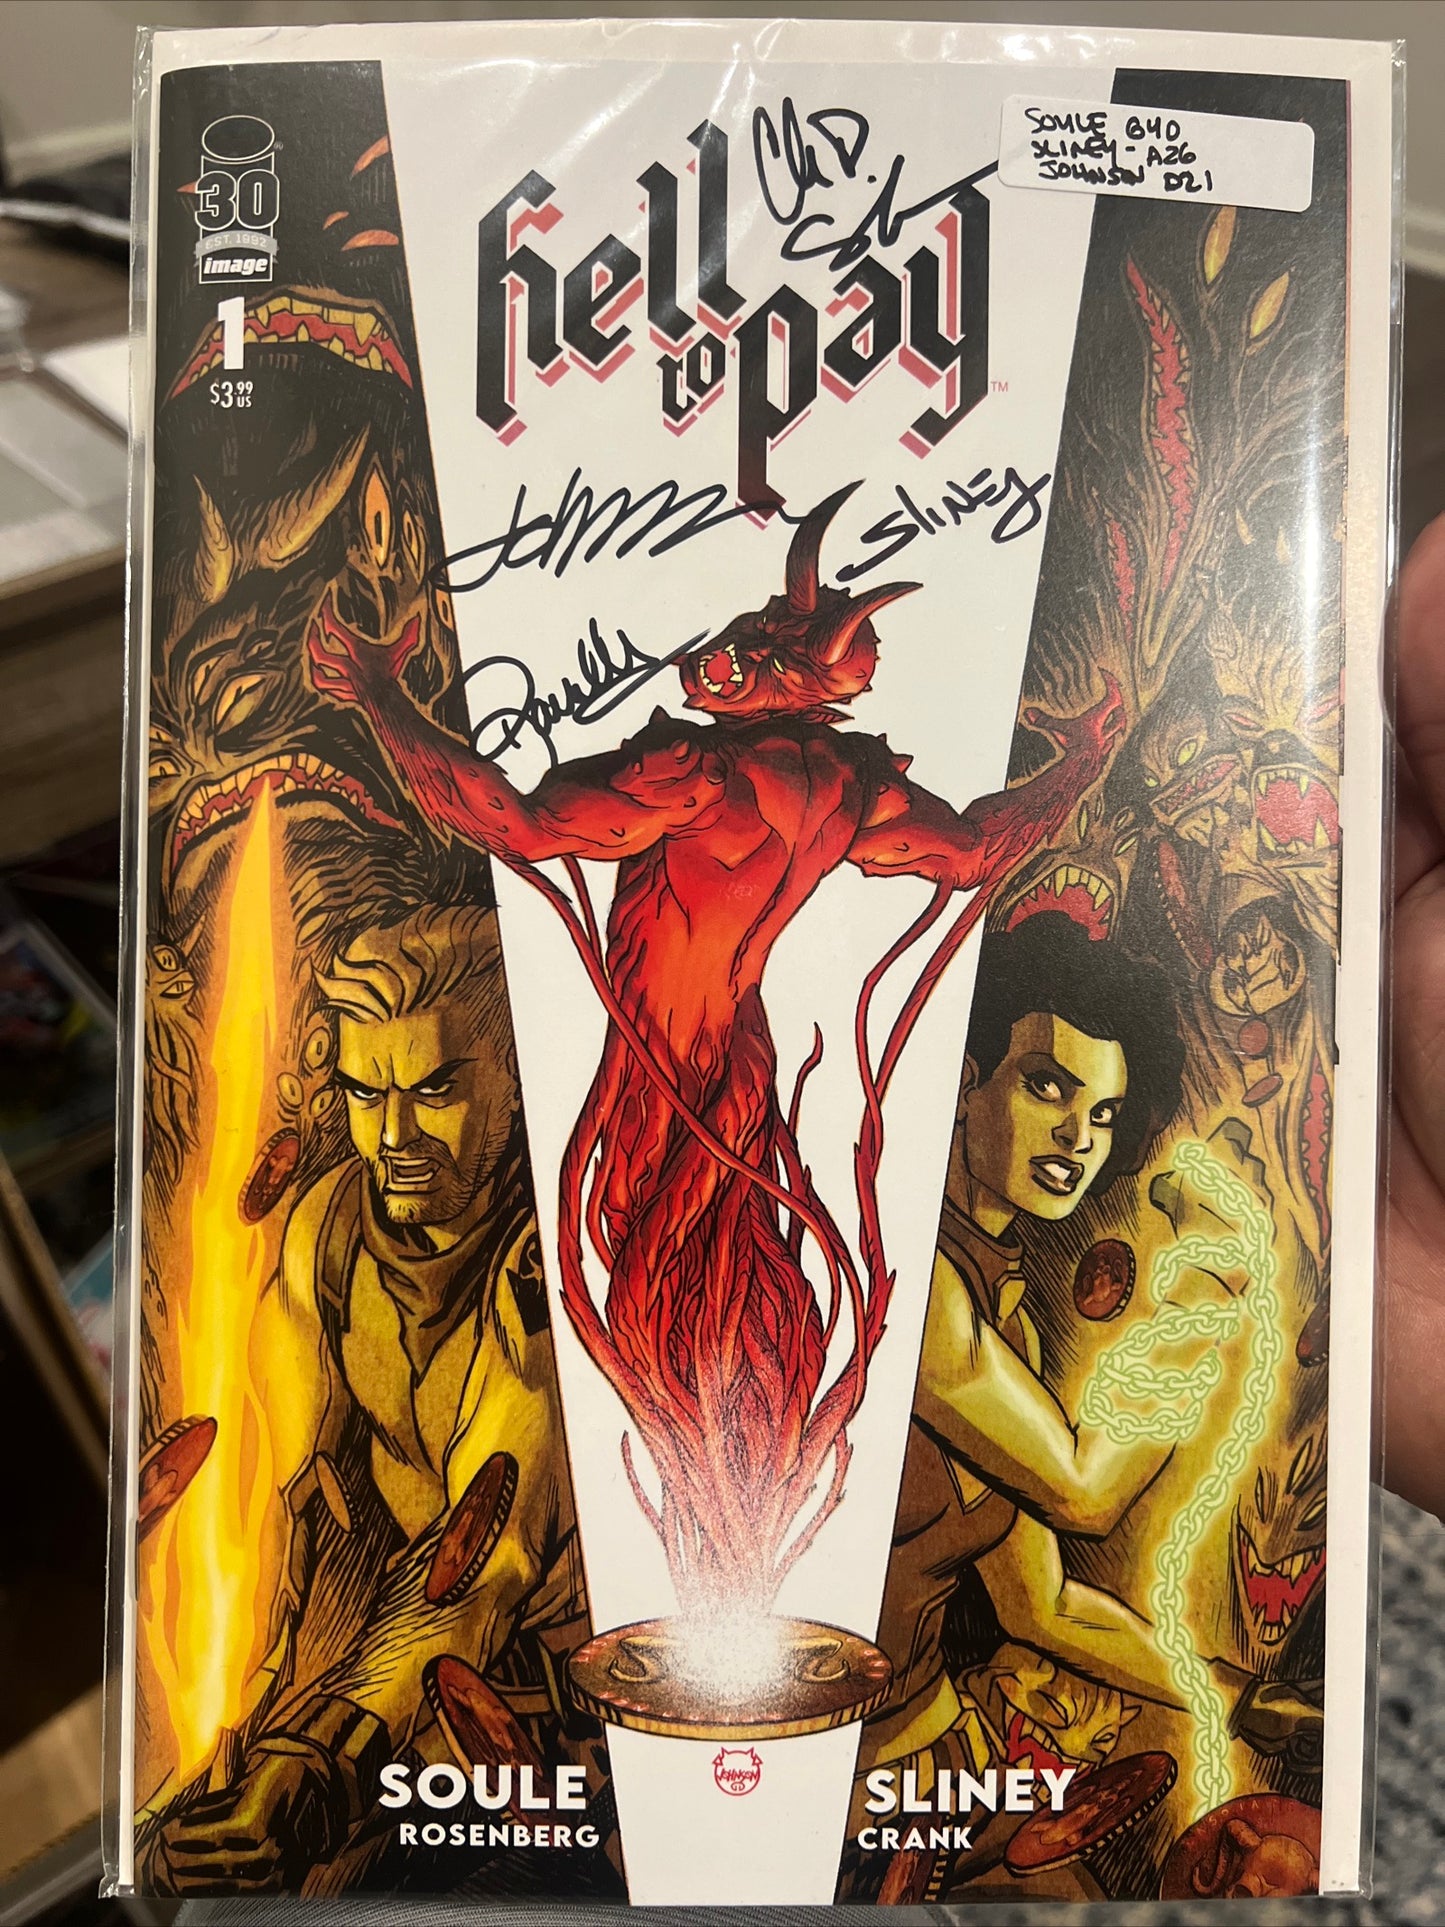 Hell to Pay #1 (Image Comics) Signed by Charles Soule, Will Sliney, Dave Johnson and Rachelle Rosenberg